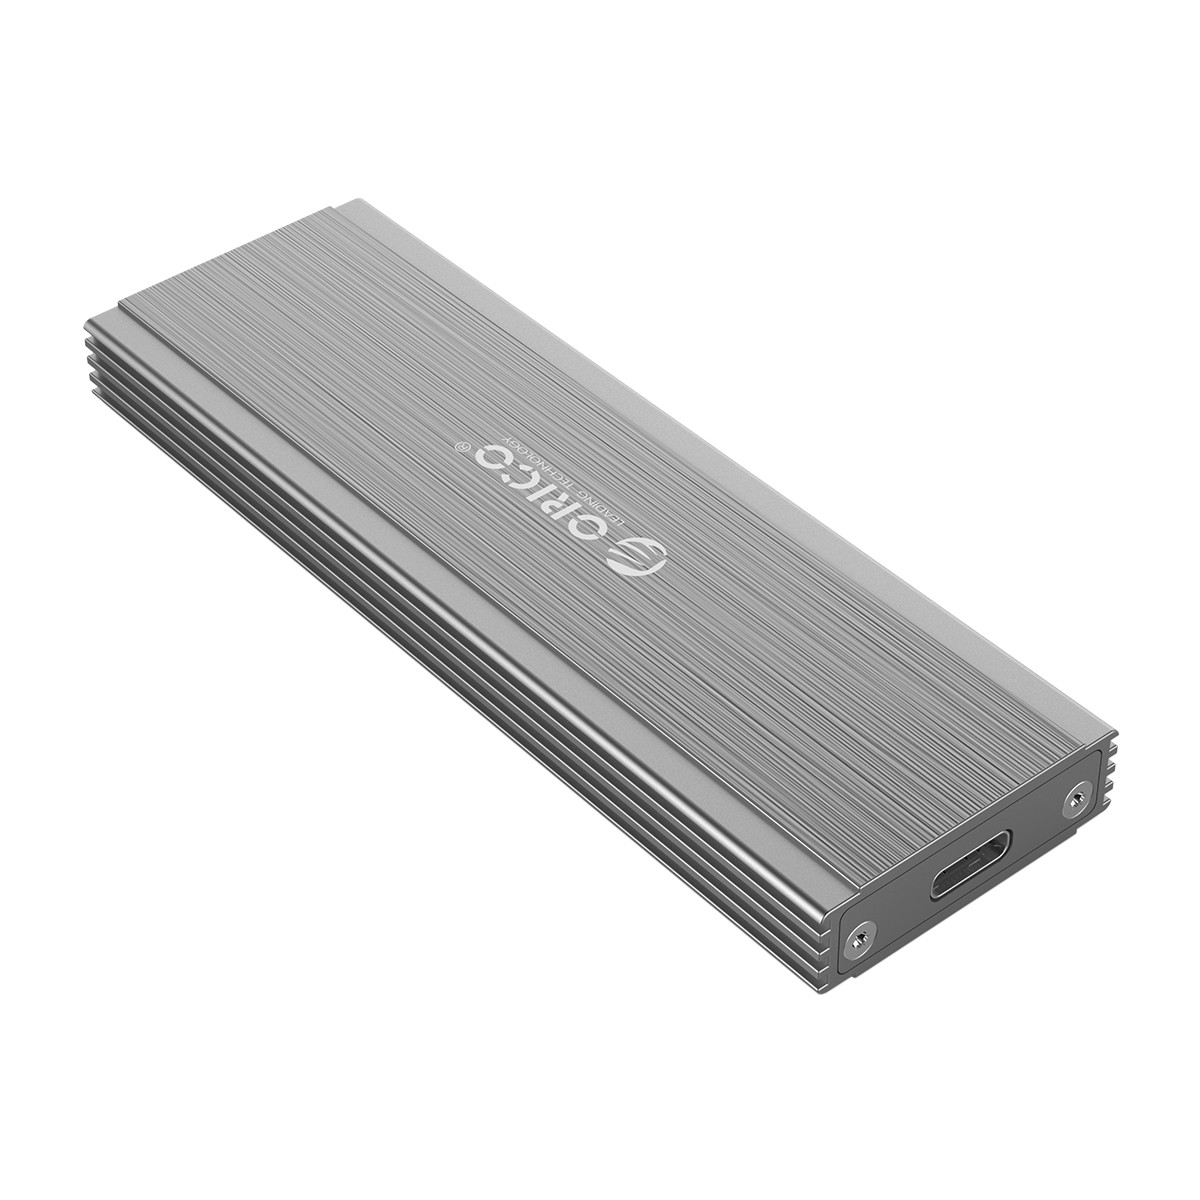 Find ORICO USB3 1 Type C NGFF M 2 Hard Drive Enclosure Aluminum Alloy 5Gbps SSD Enclosure Sliding Cover for MGFF M 2 Hard Disk for Sale on Gipsybee.com with cryptocurrencies